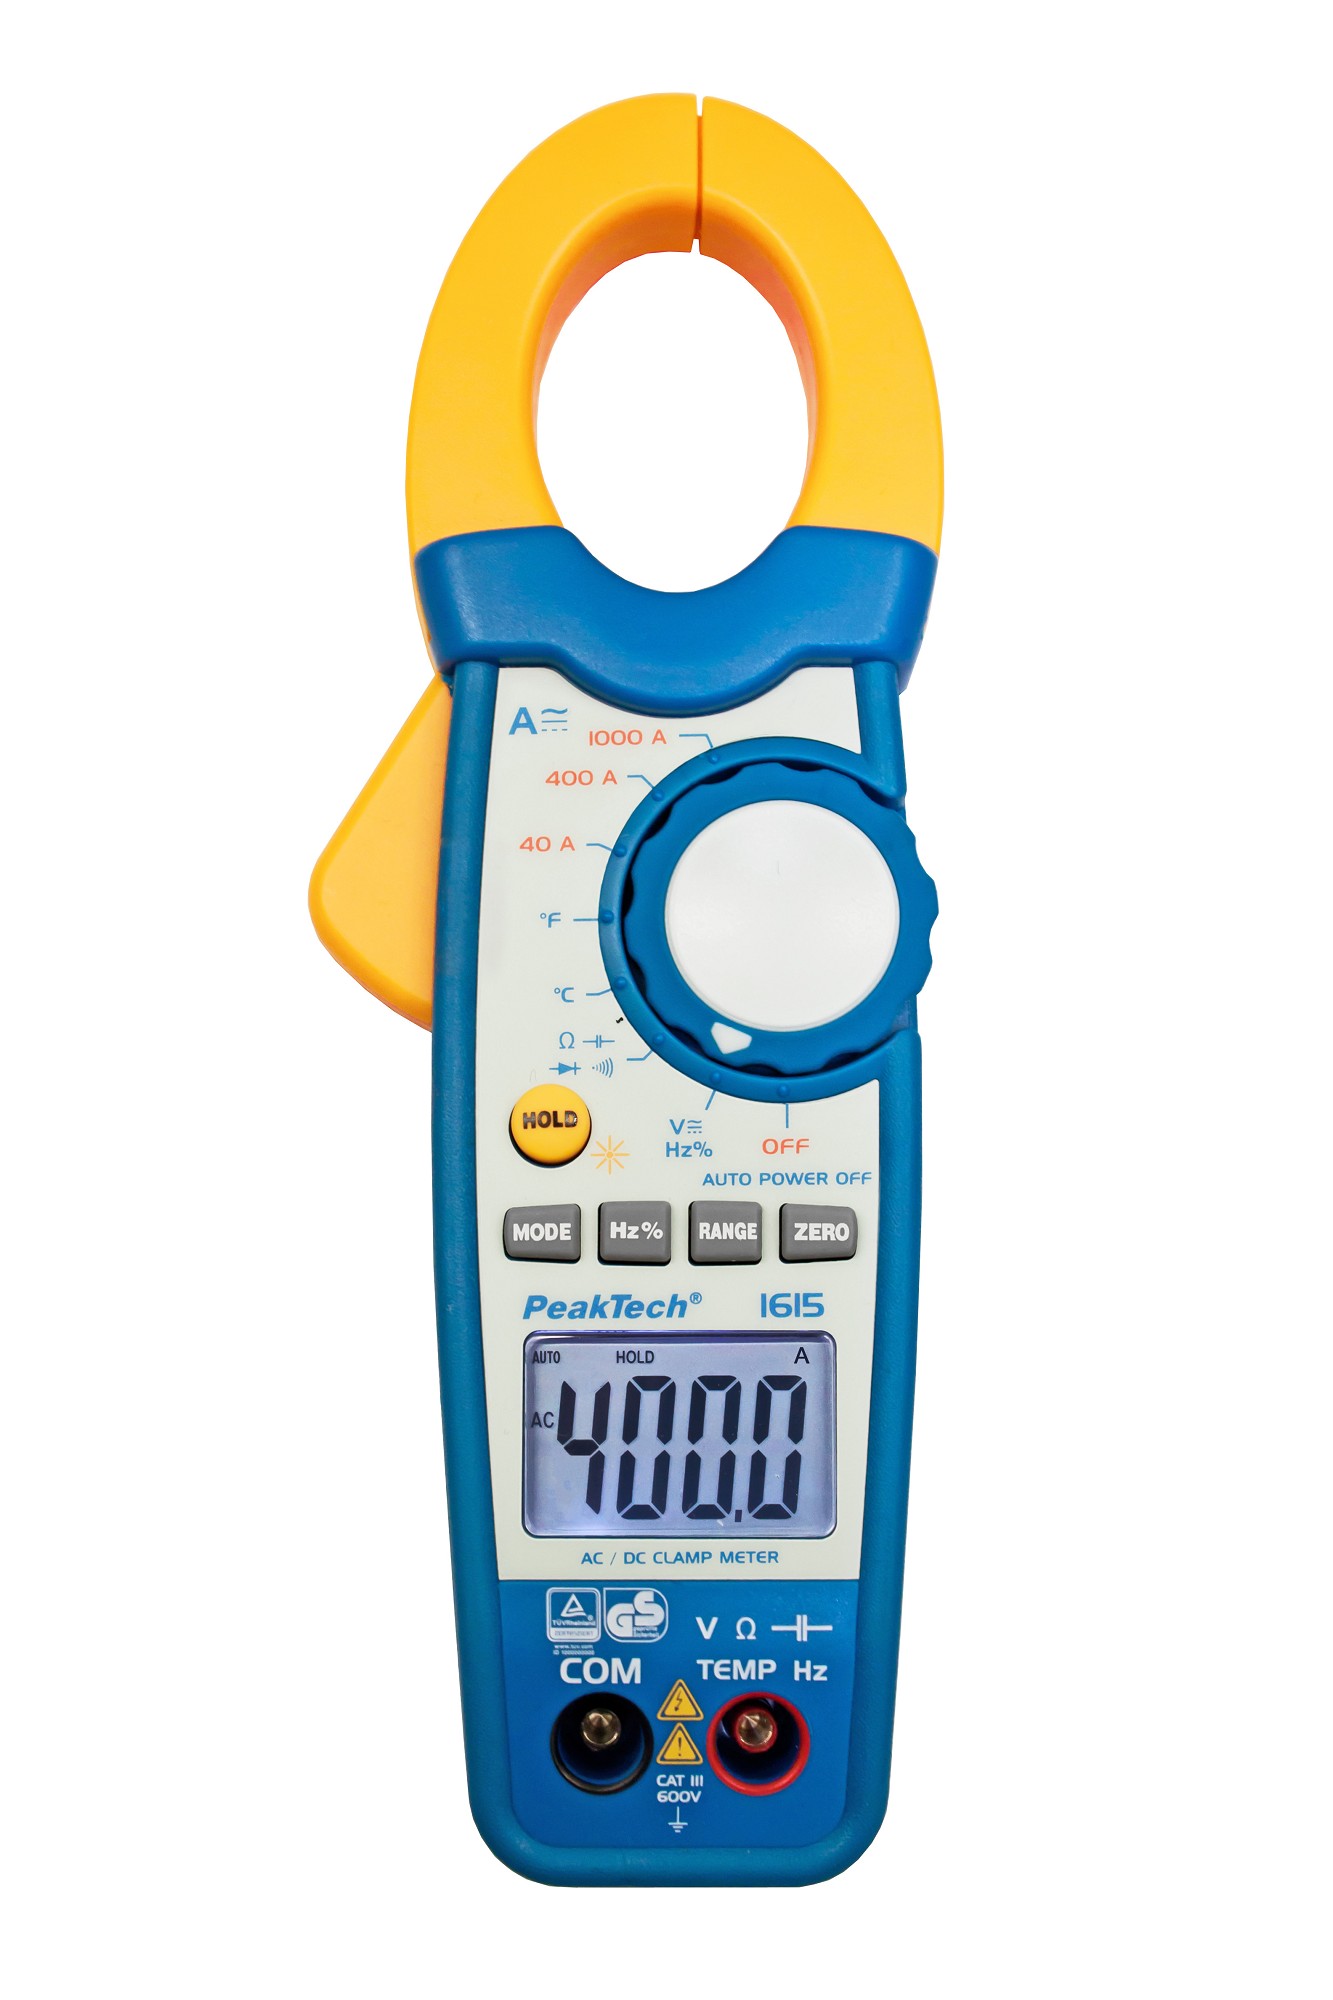 «PeakTech® P 1615» Clamp meter 4,000 counts 1000 A AC/DC